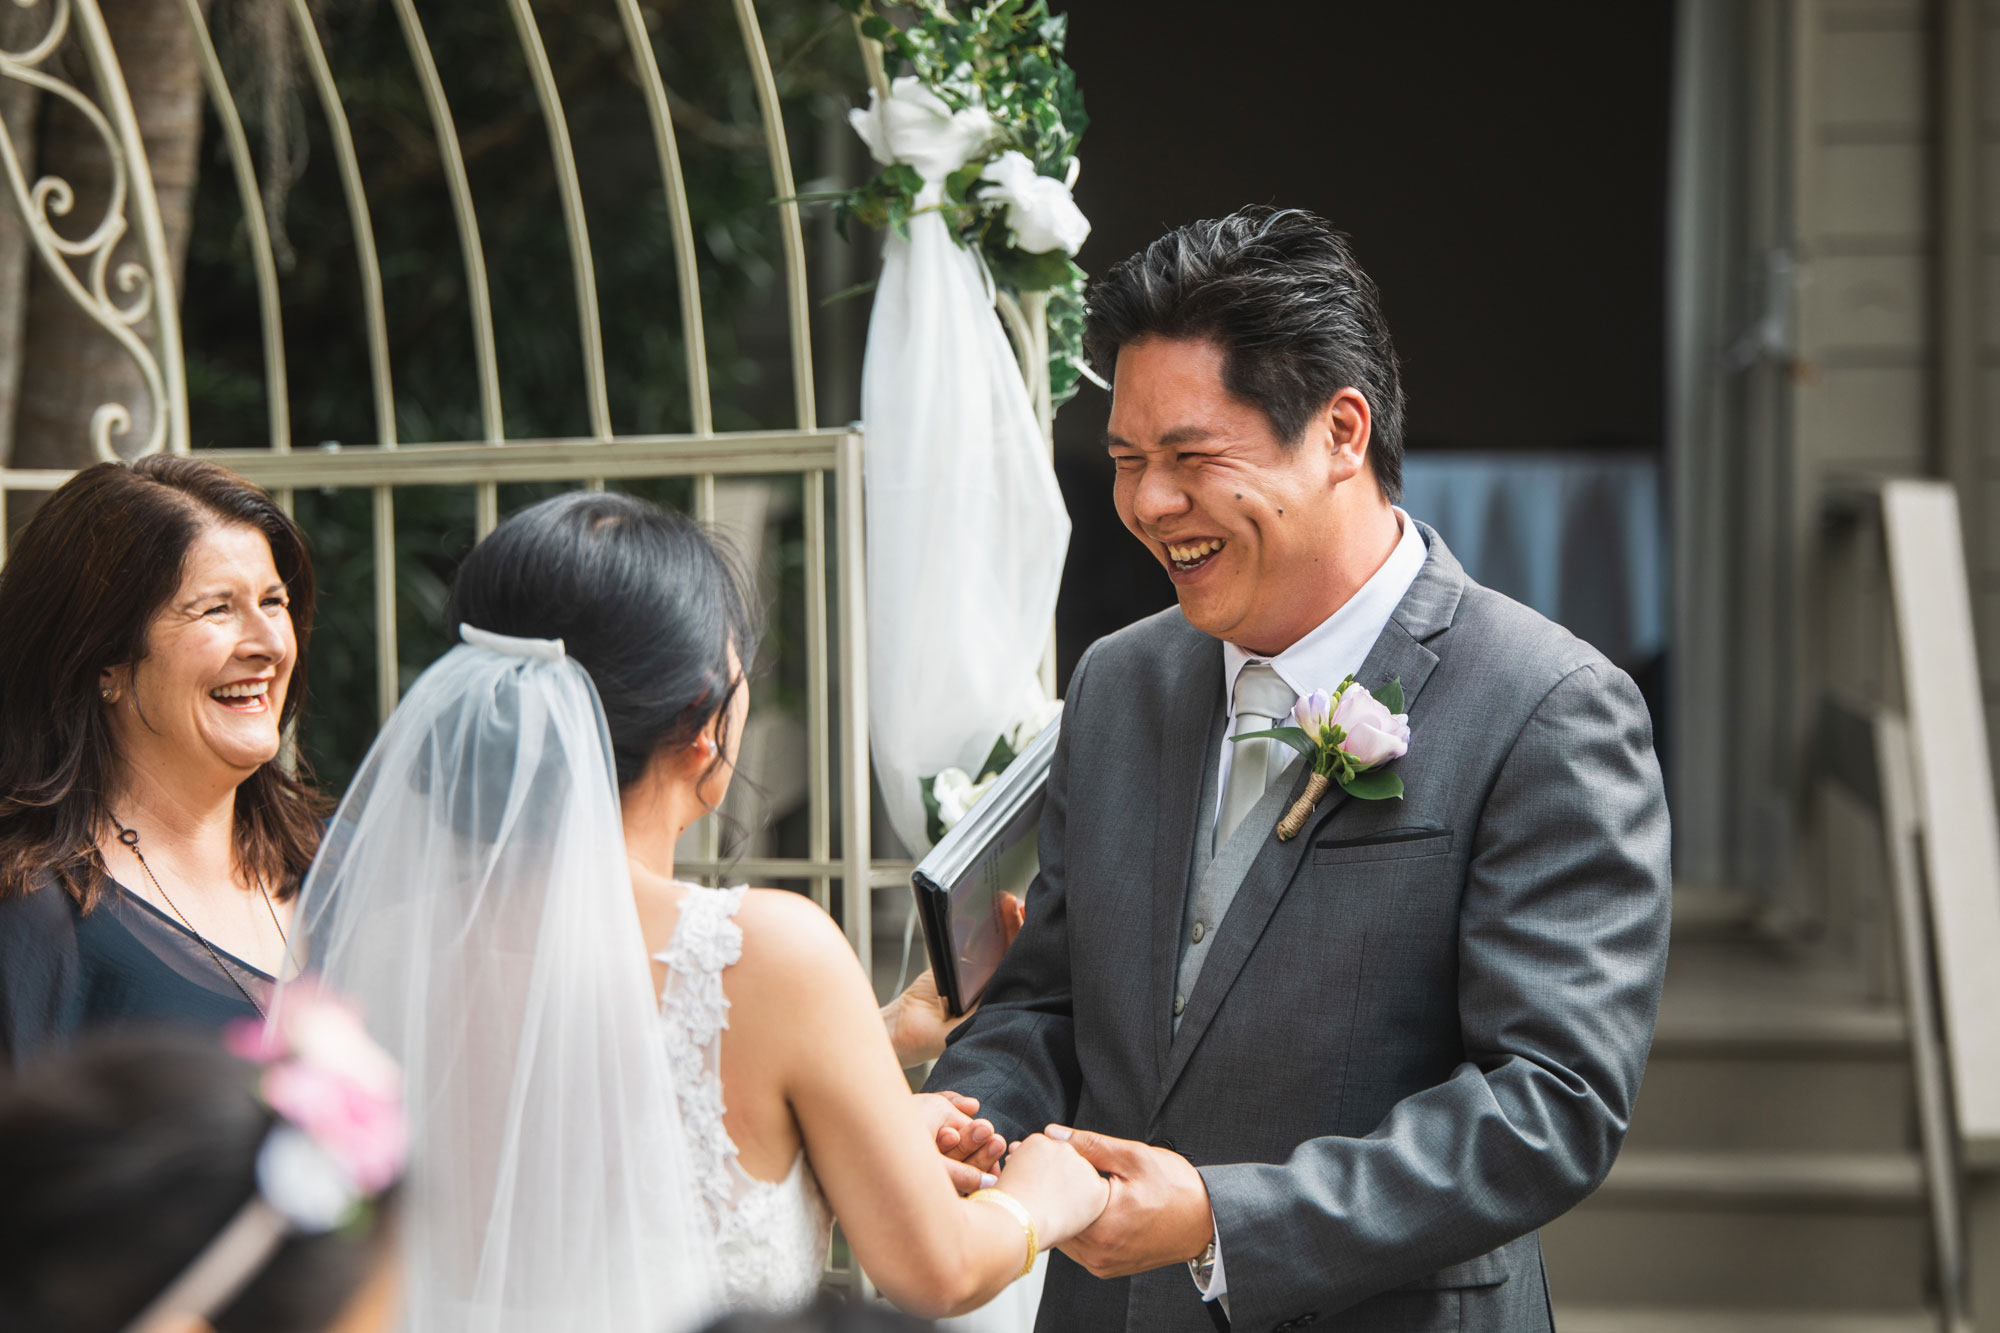 groom happily smiling at the wedding